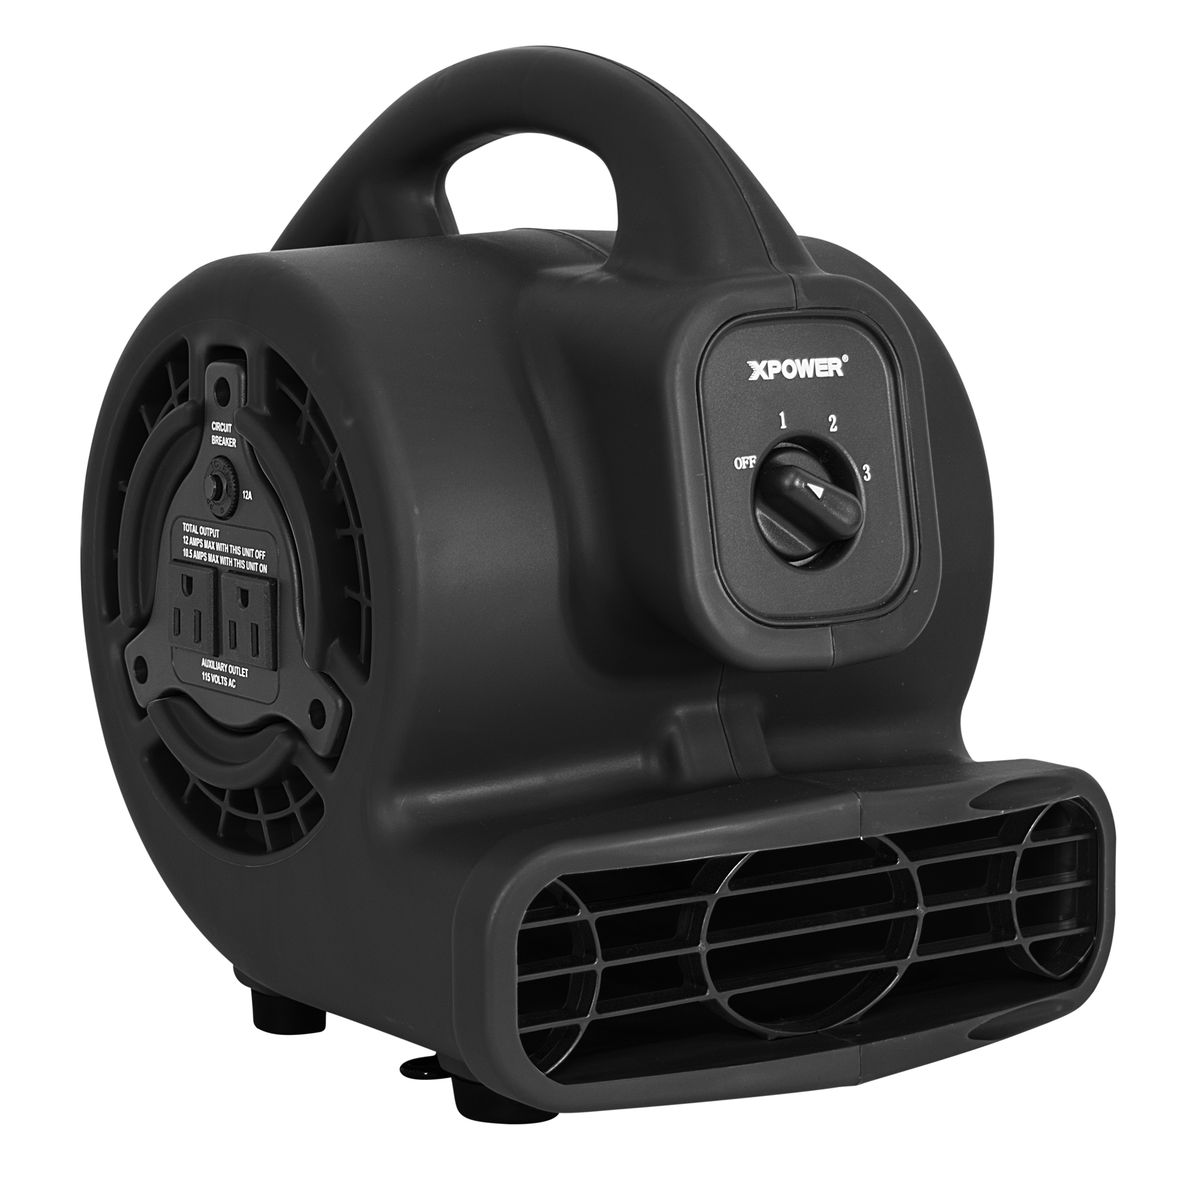 600 CFM Multi-Purpose Mini Mighty Air Mover, Utility Fan & Dryer Blower with Built-in Power Outlets - Black -  Xpower, XP626292